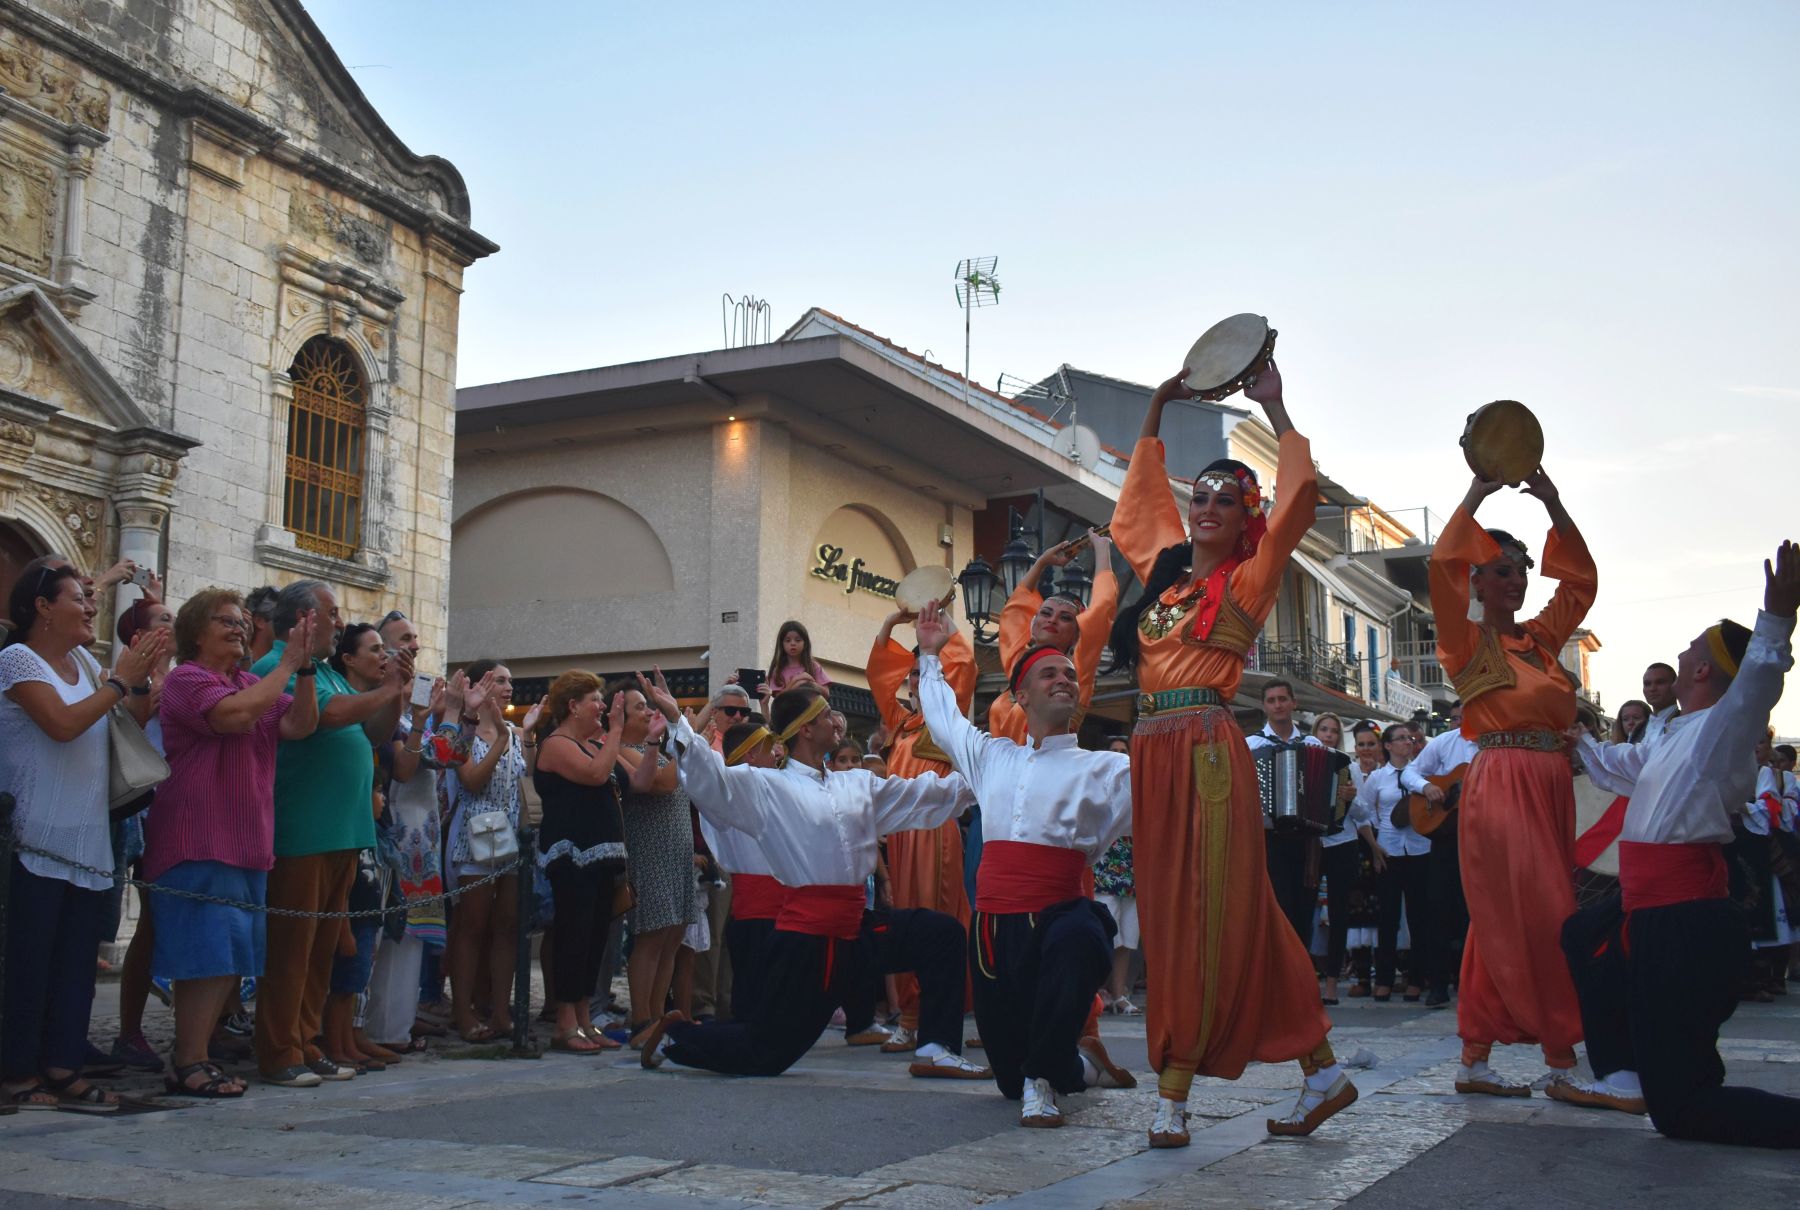  International Folklore Festival | Dancing group in the streets of Lefkada | Culture 